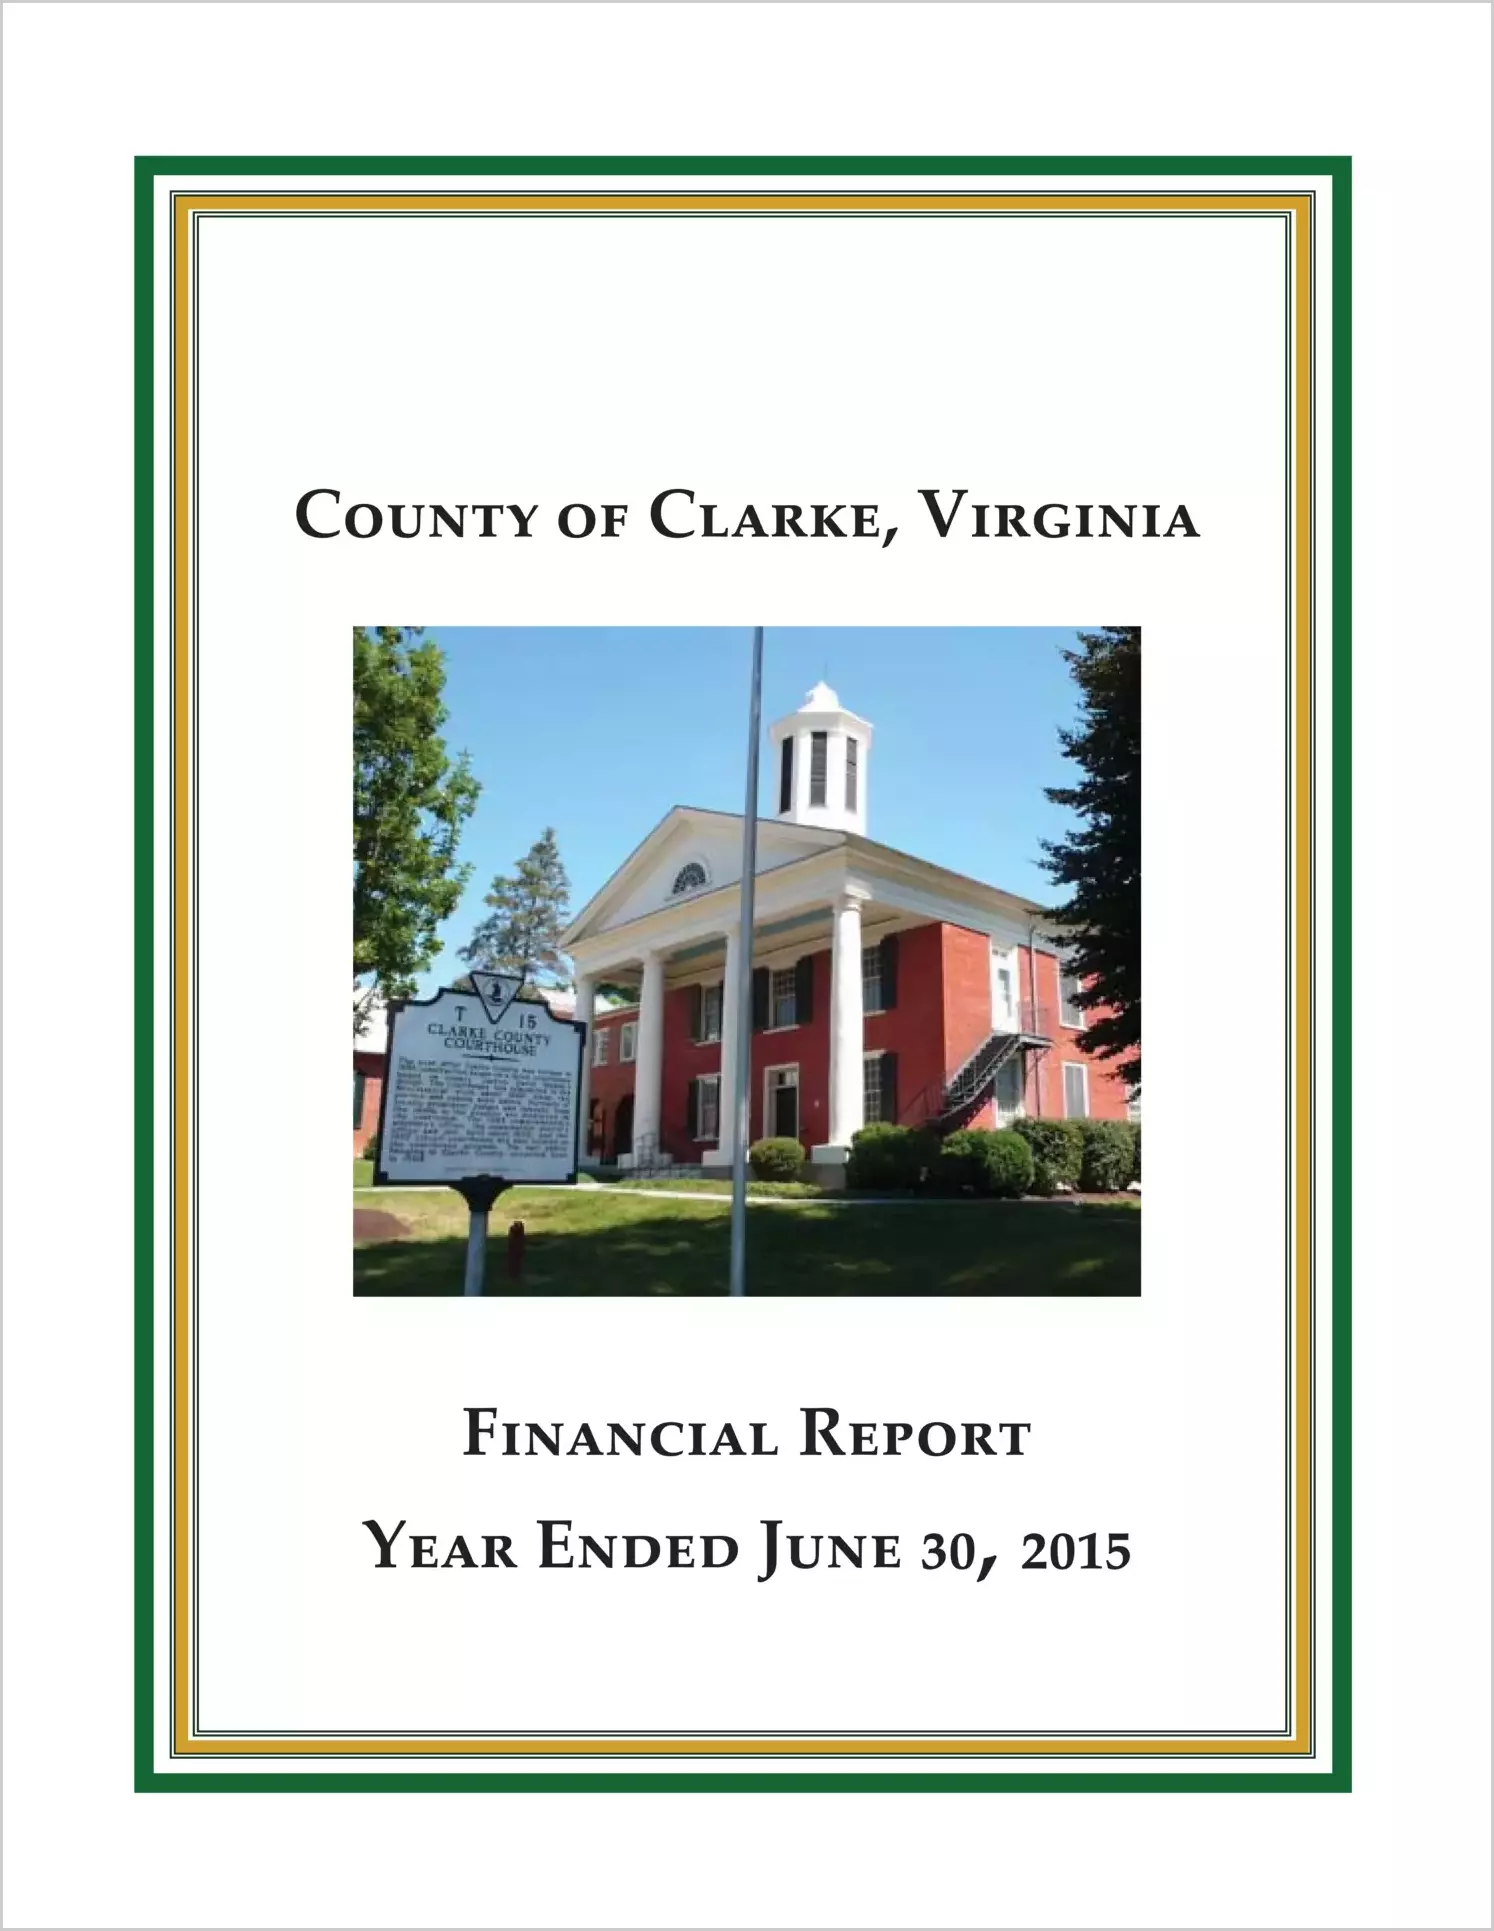 2015 Annual Financial Report for County of Clarke